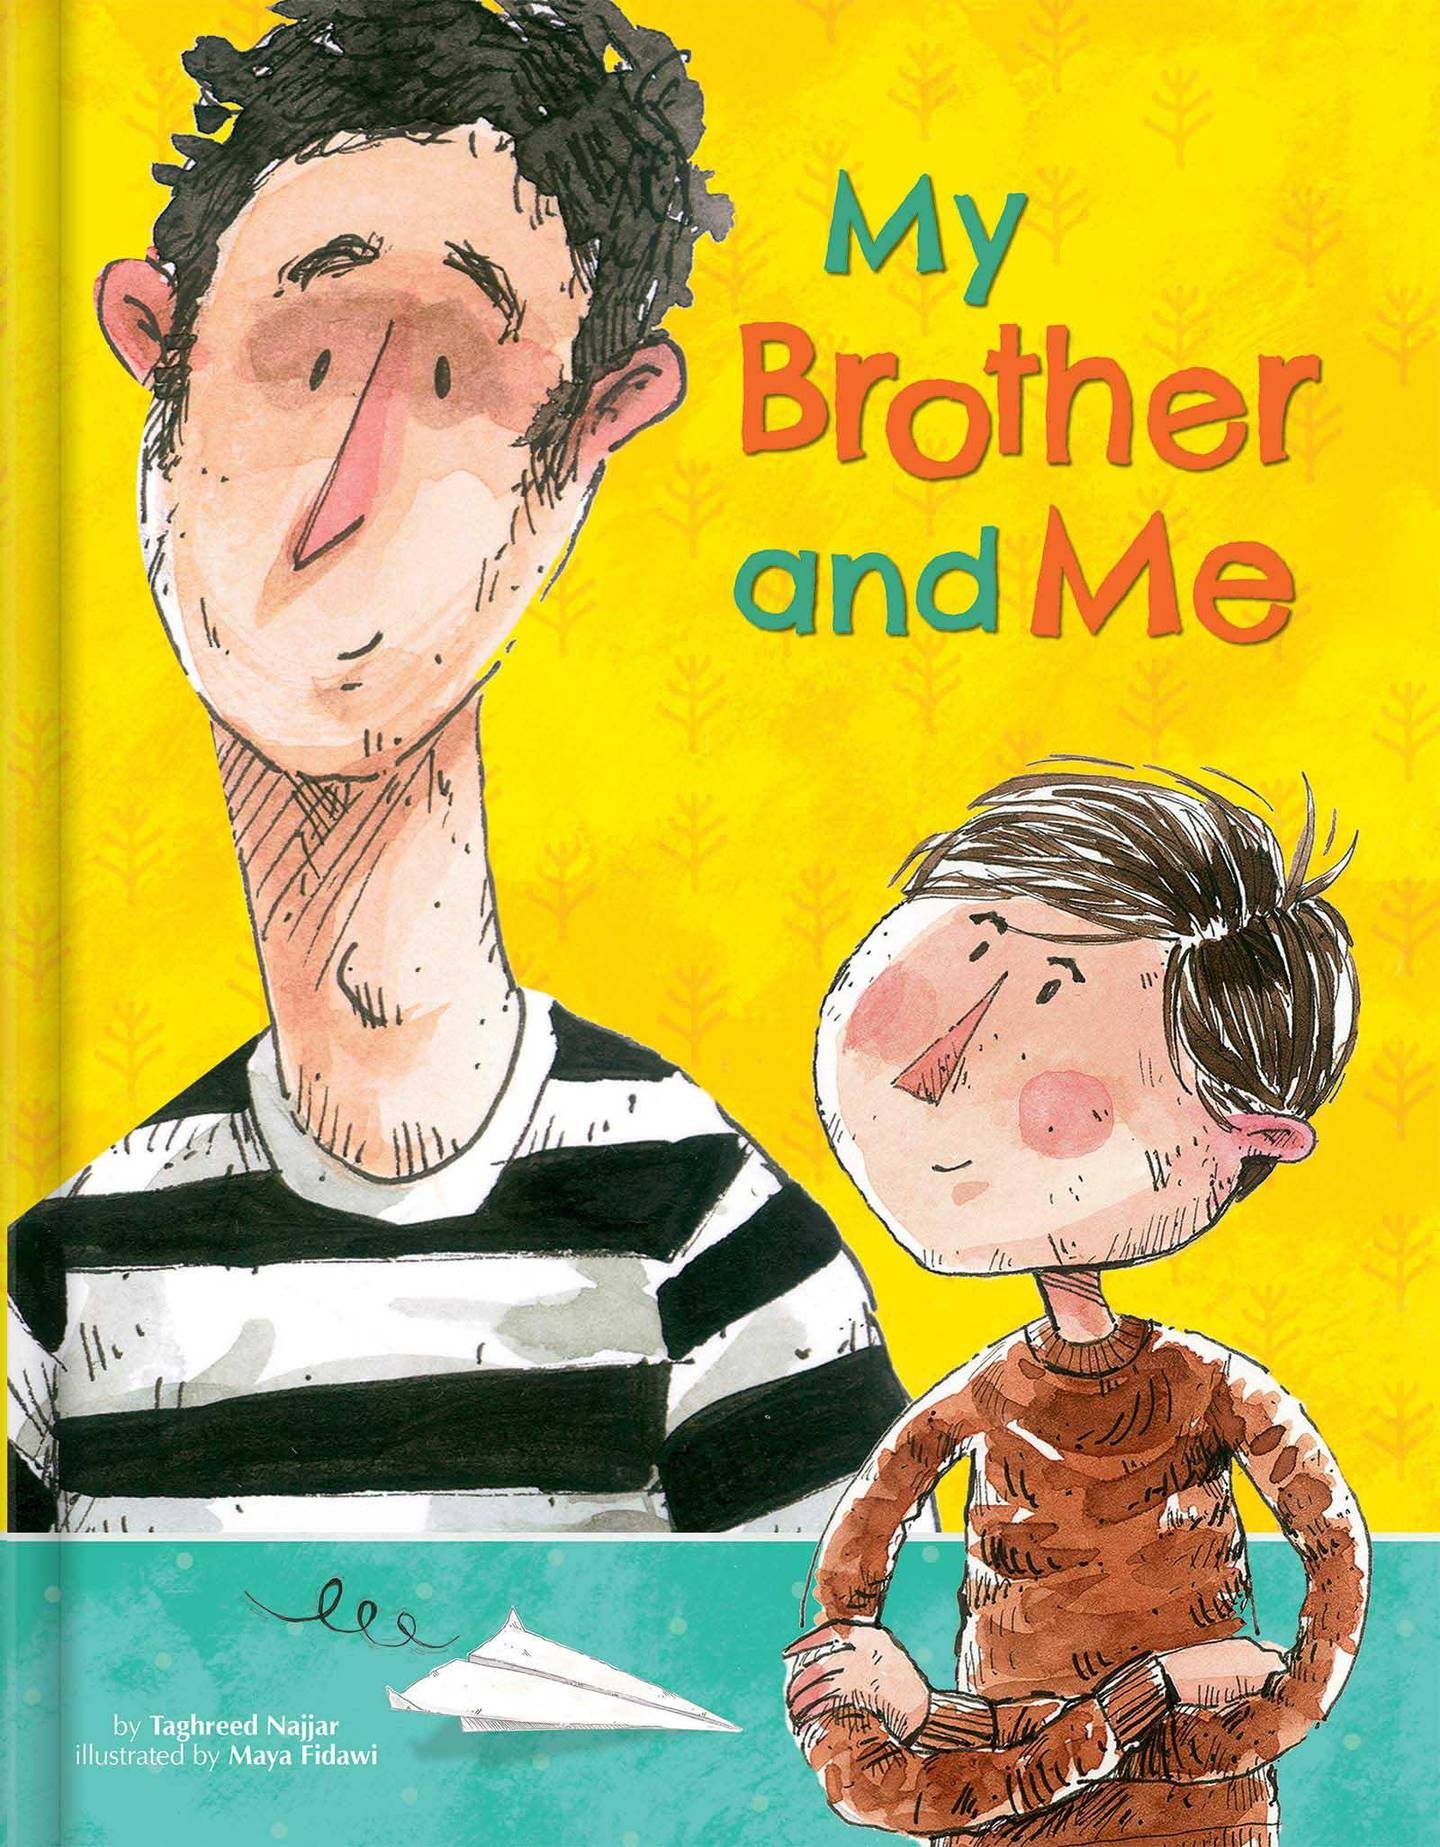 Taghreed Najjar’s My Brother and Me, illustrated by Maya Fidawi, translated by Michelle Hartman. Courtesy CrackBoom! Booms